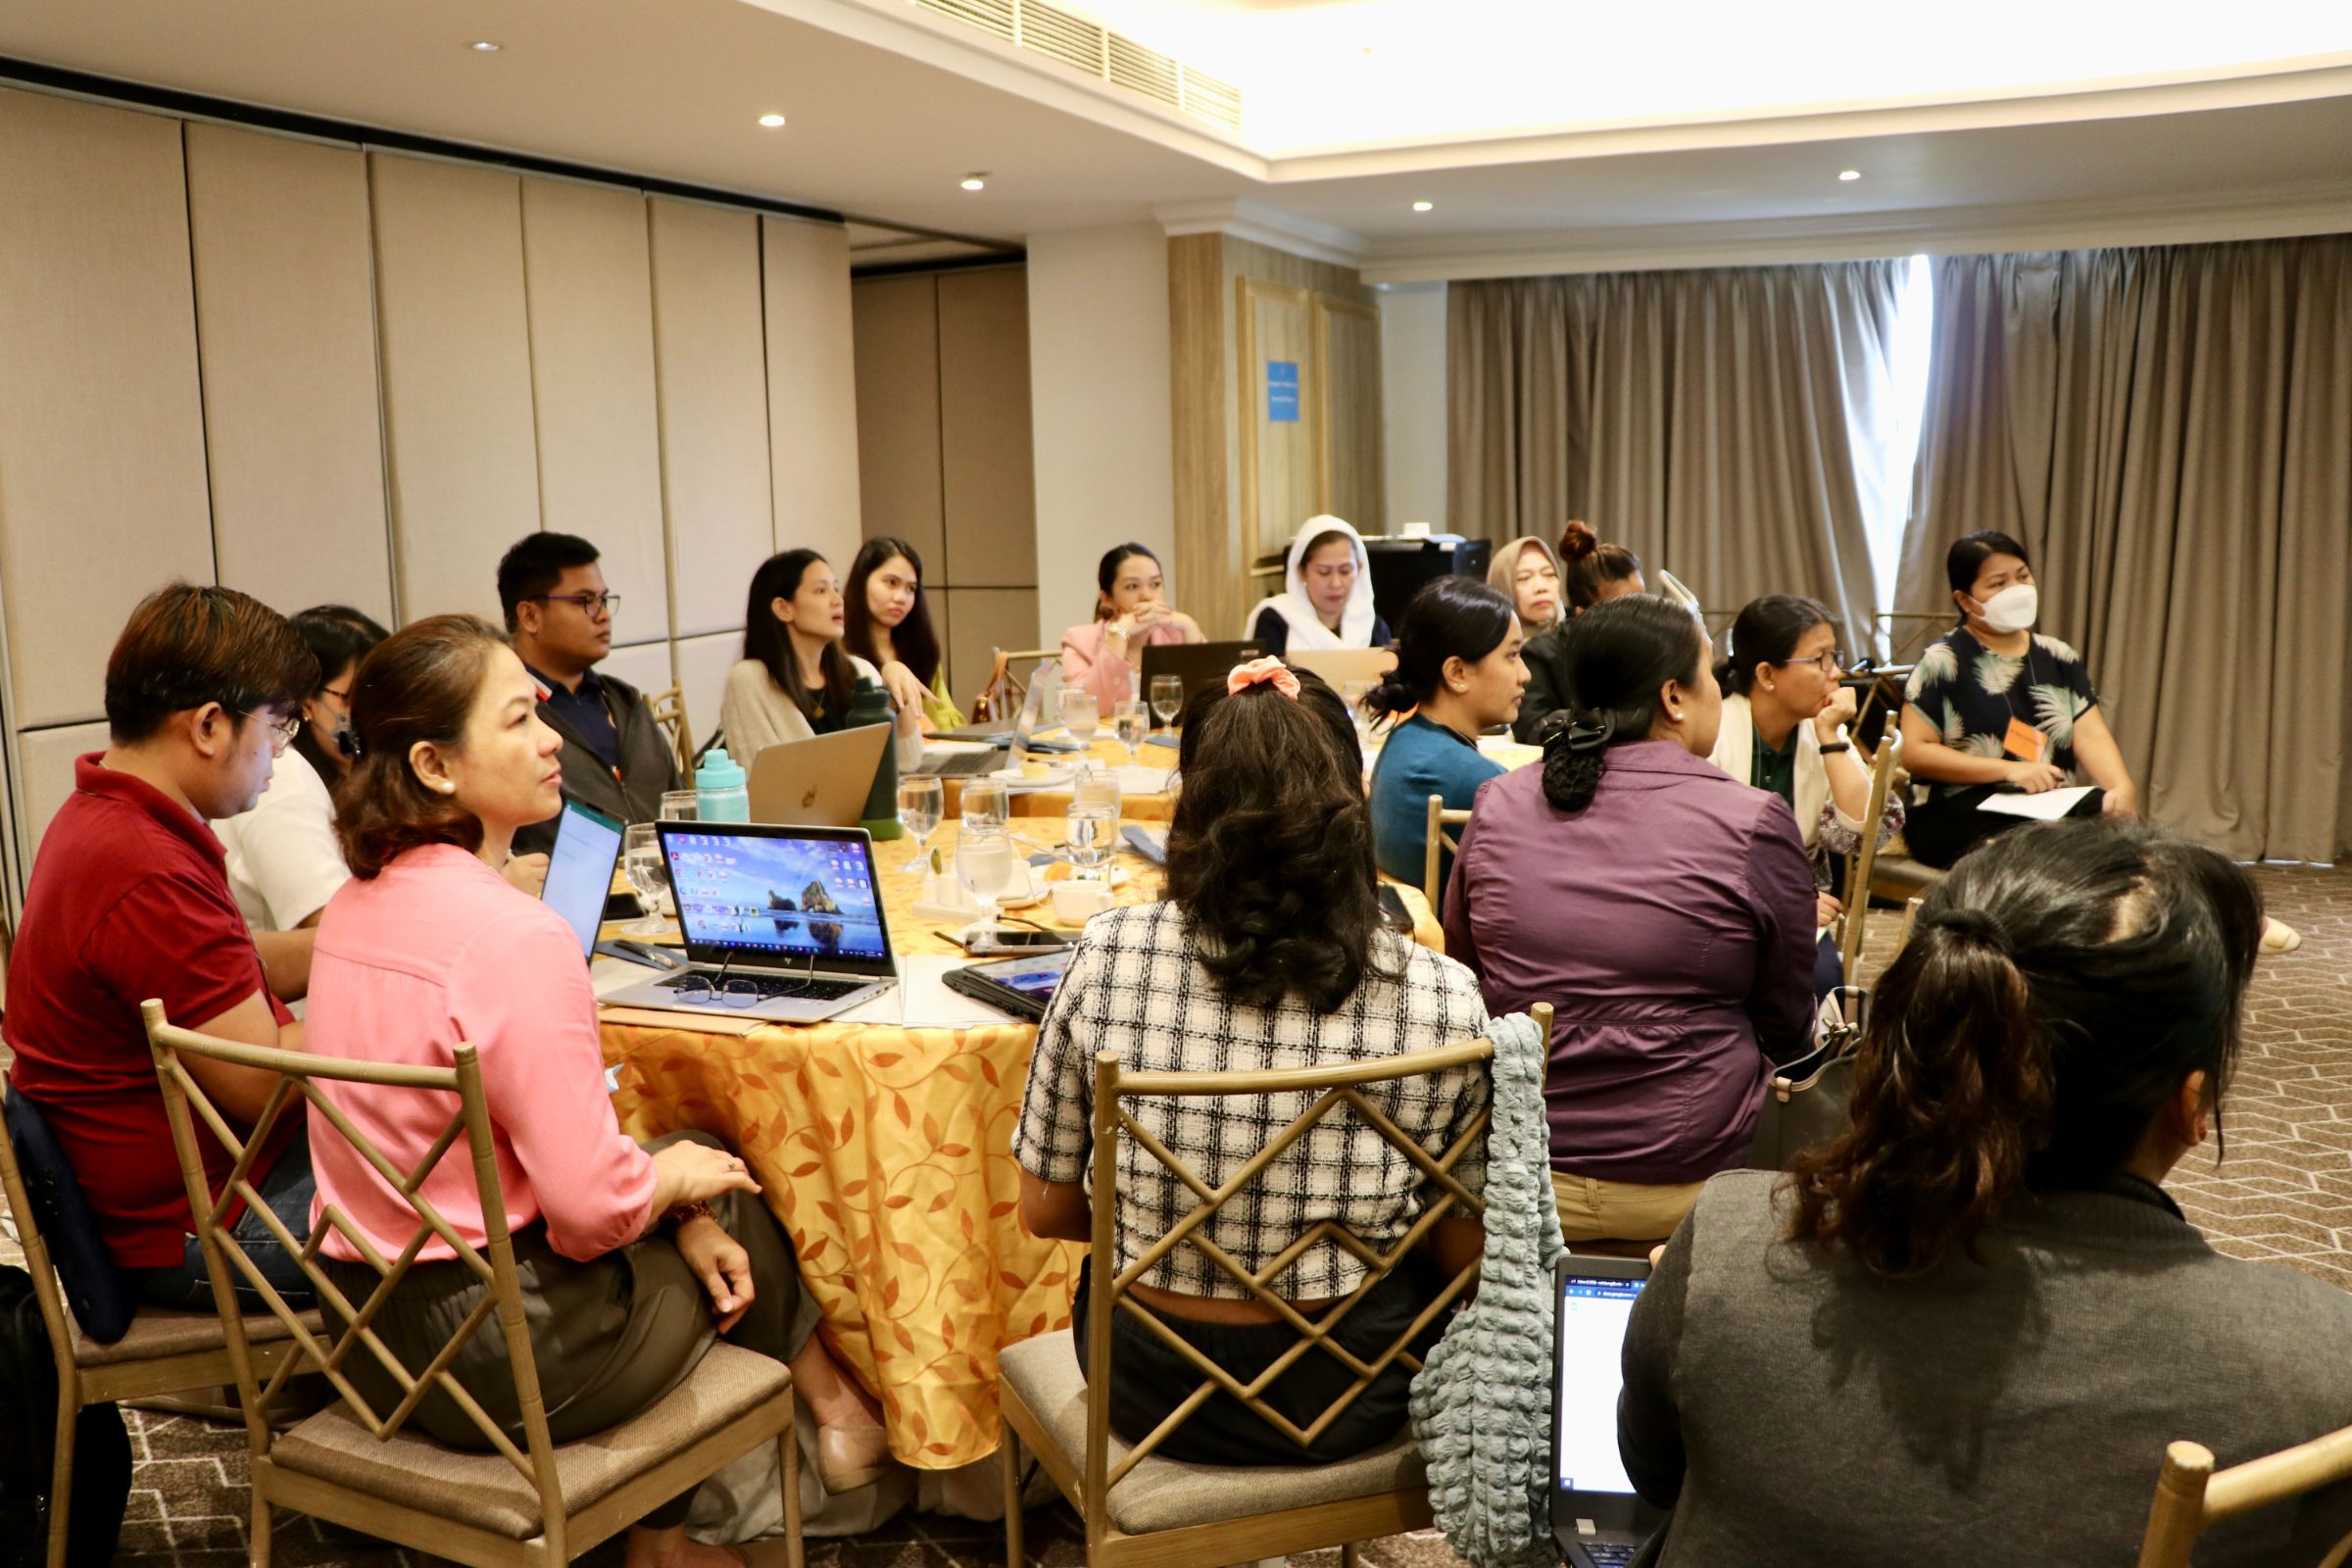 UNFPA Philippines holds Midyear Review and Planning with partners